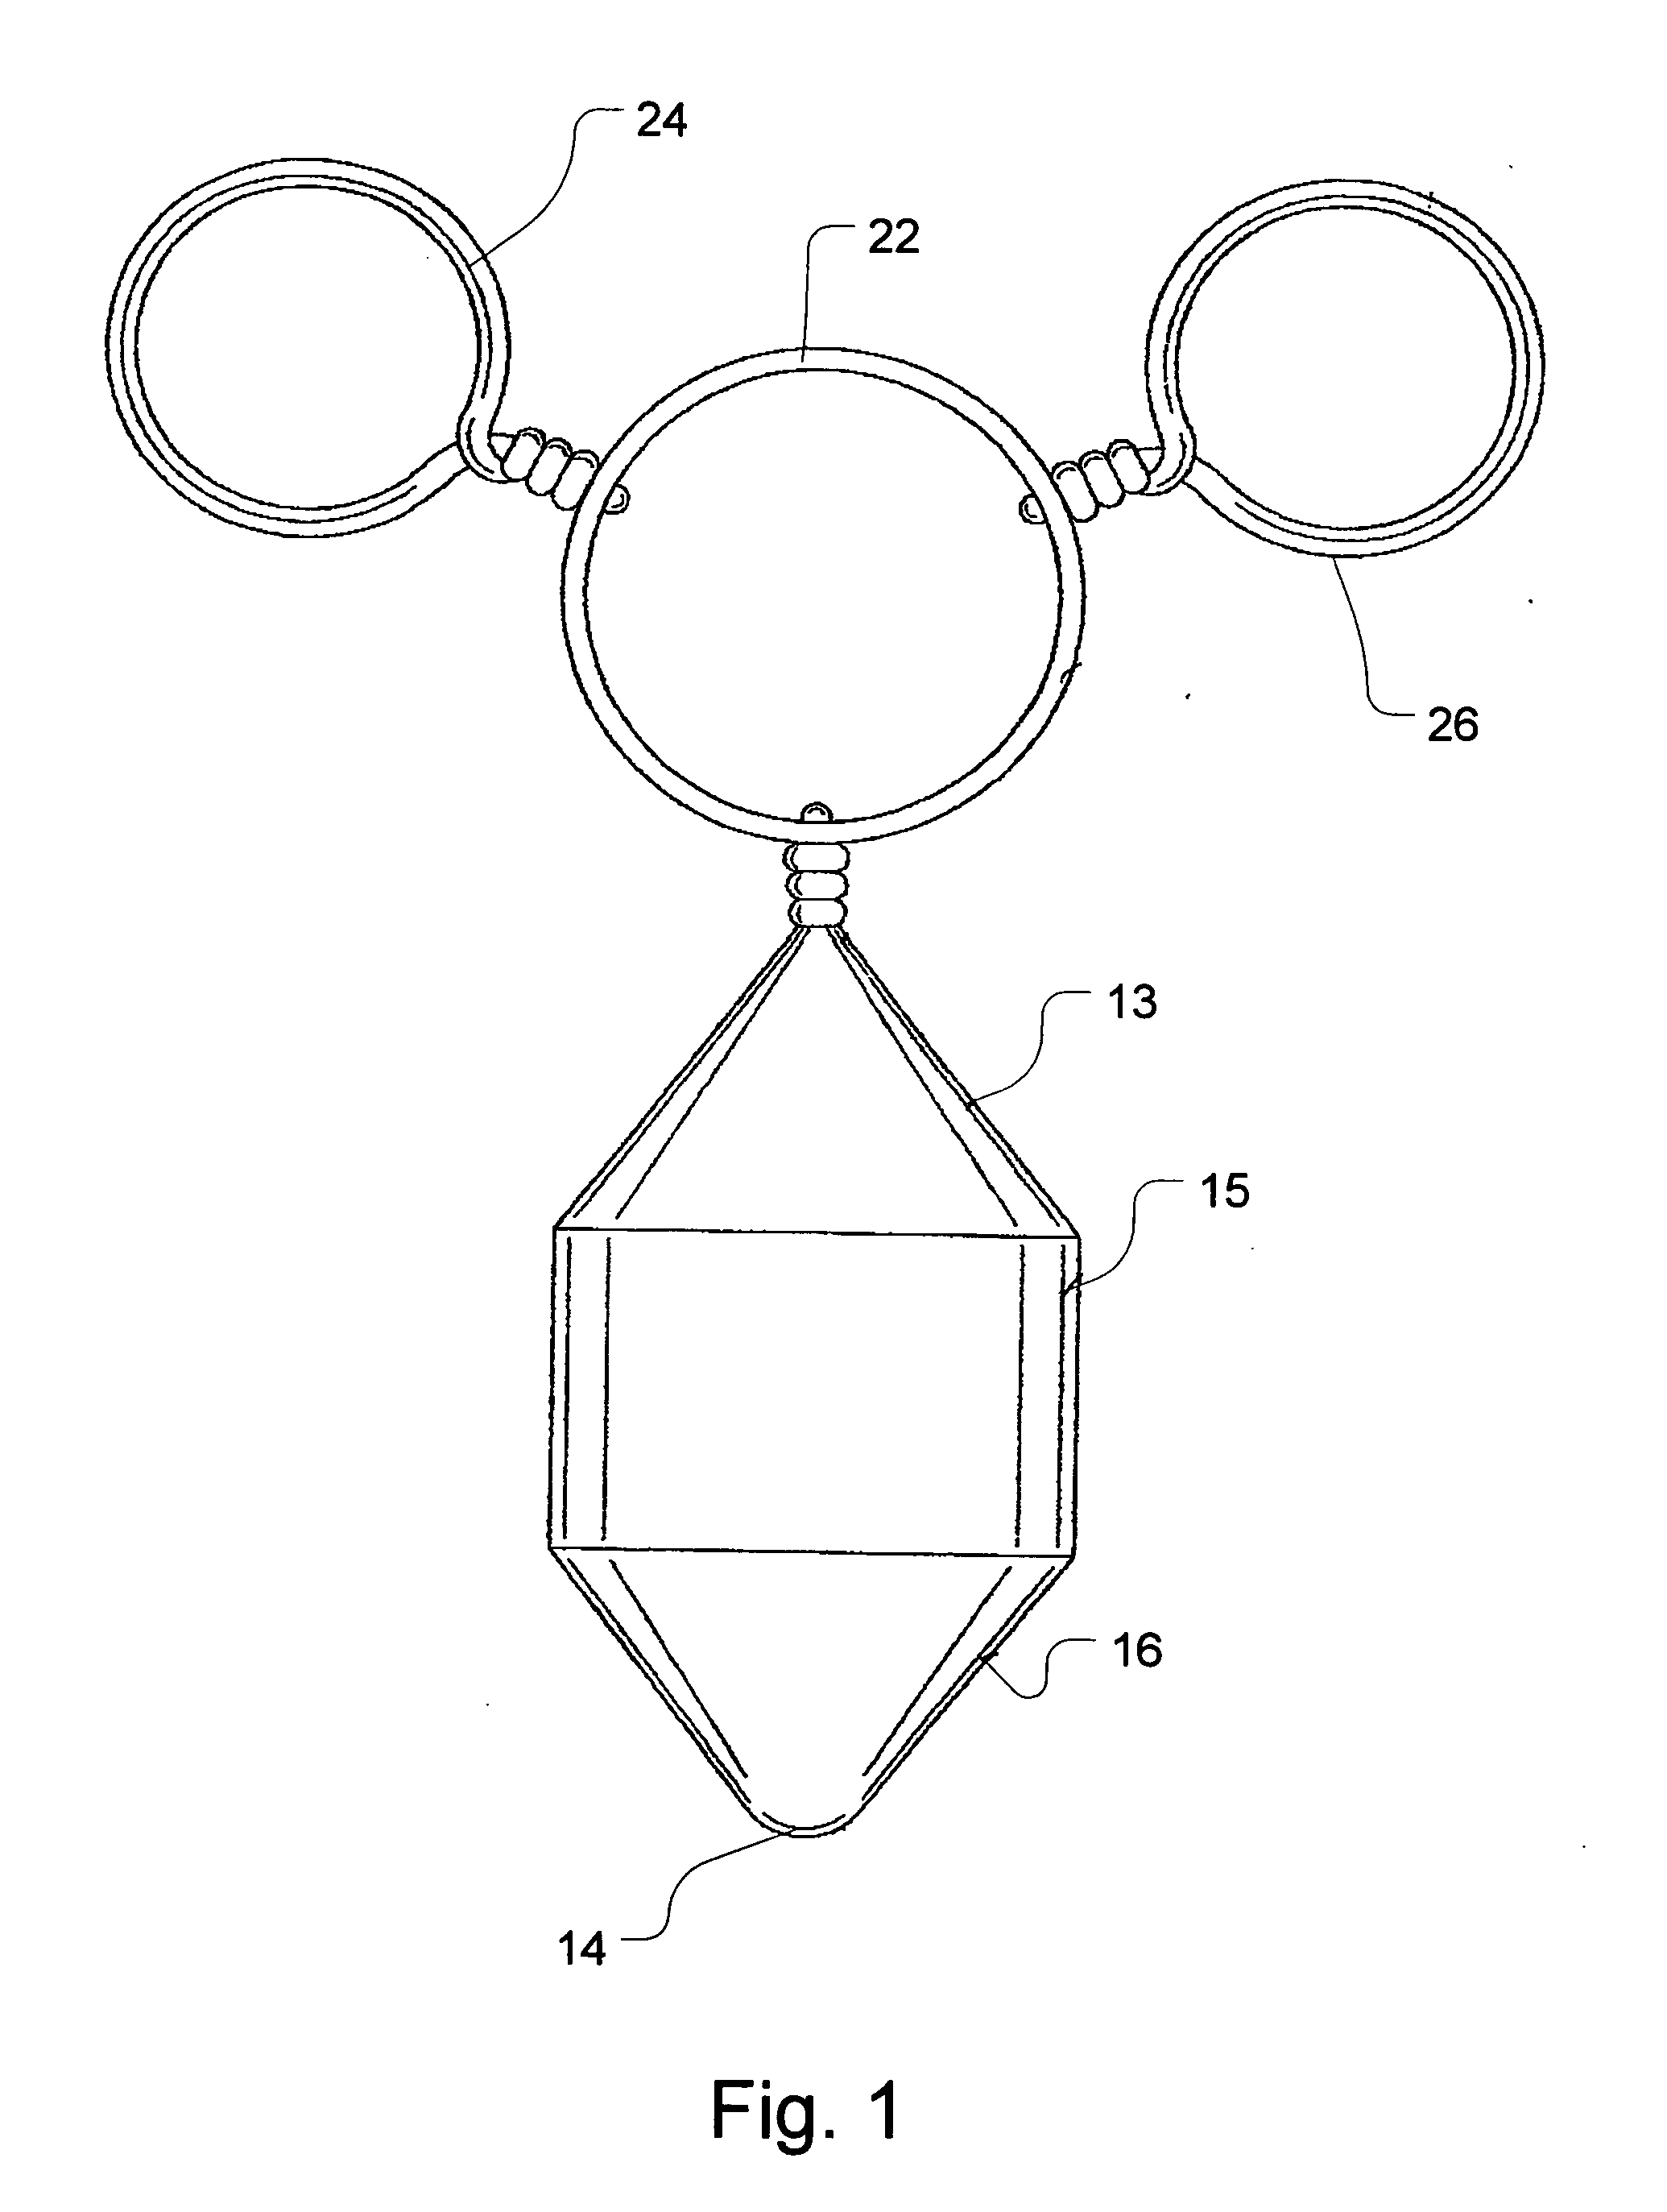 Fish luring device